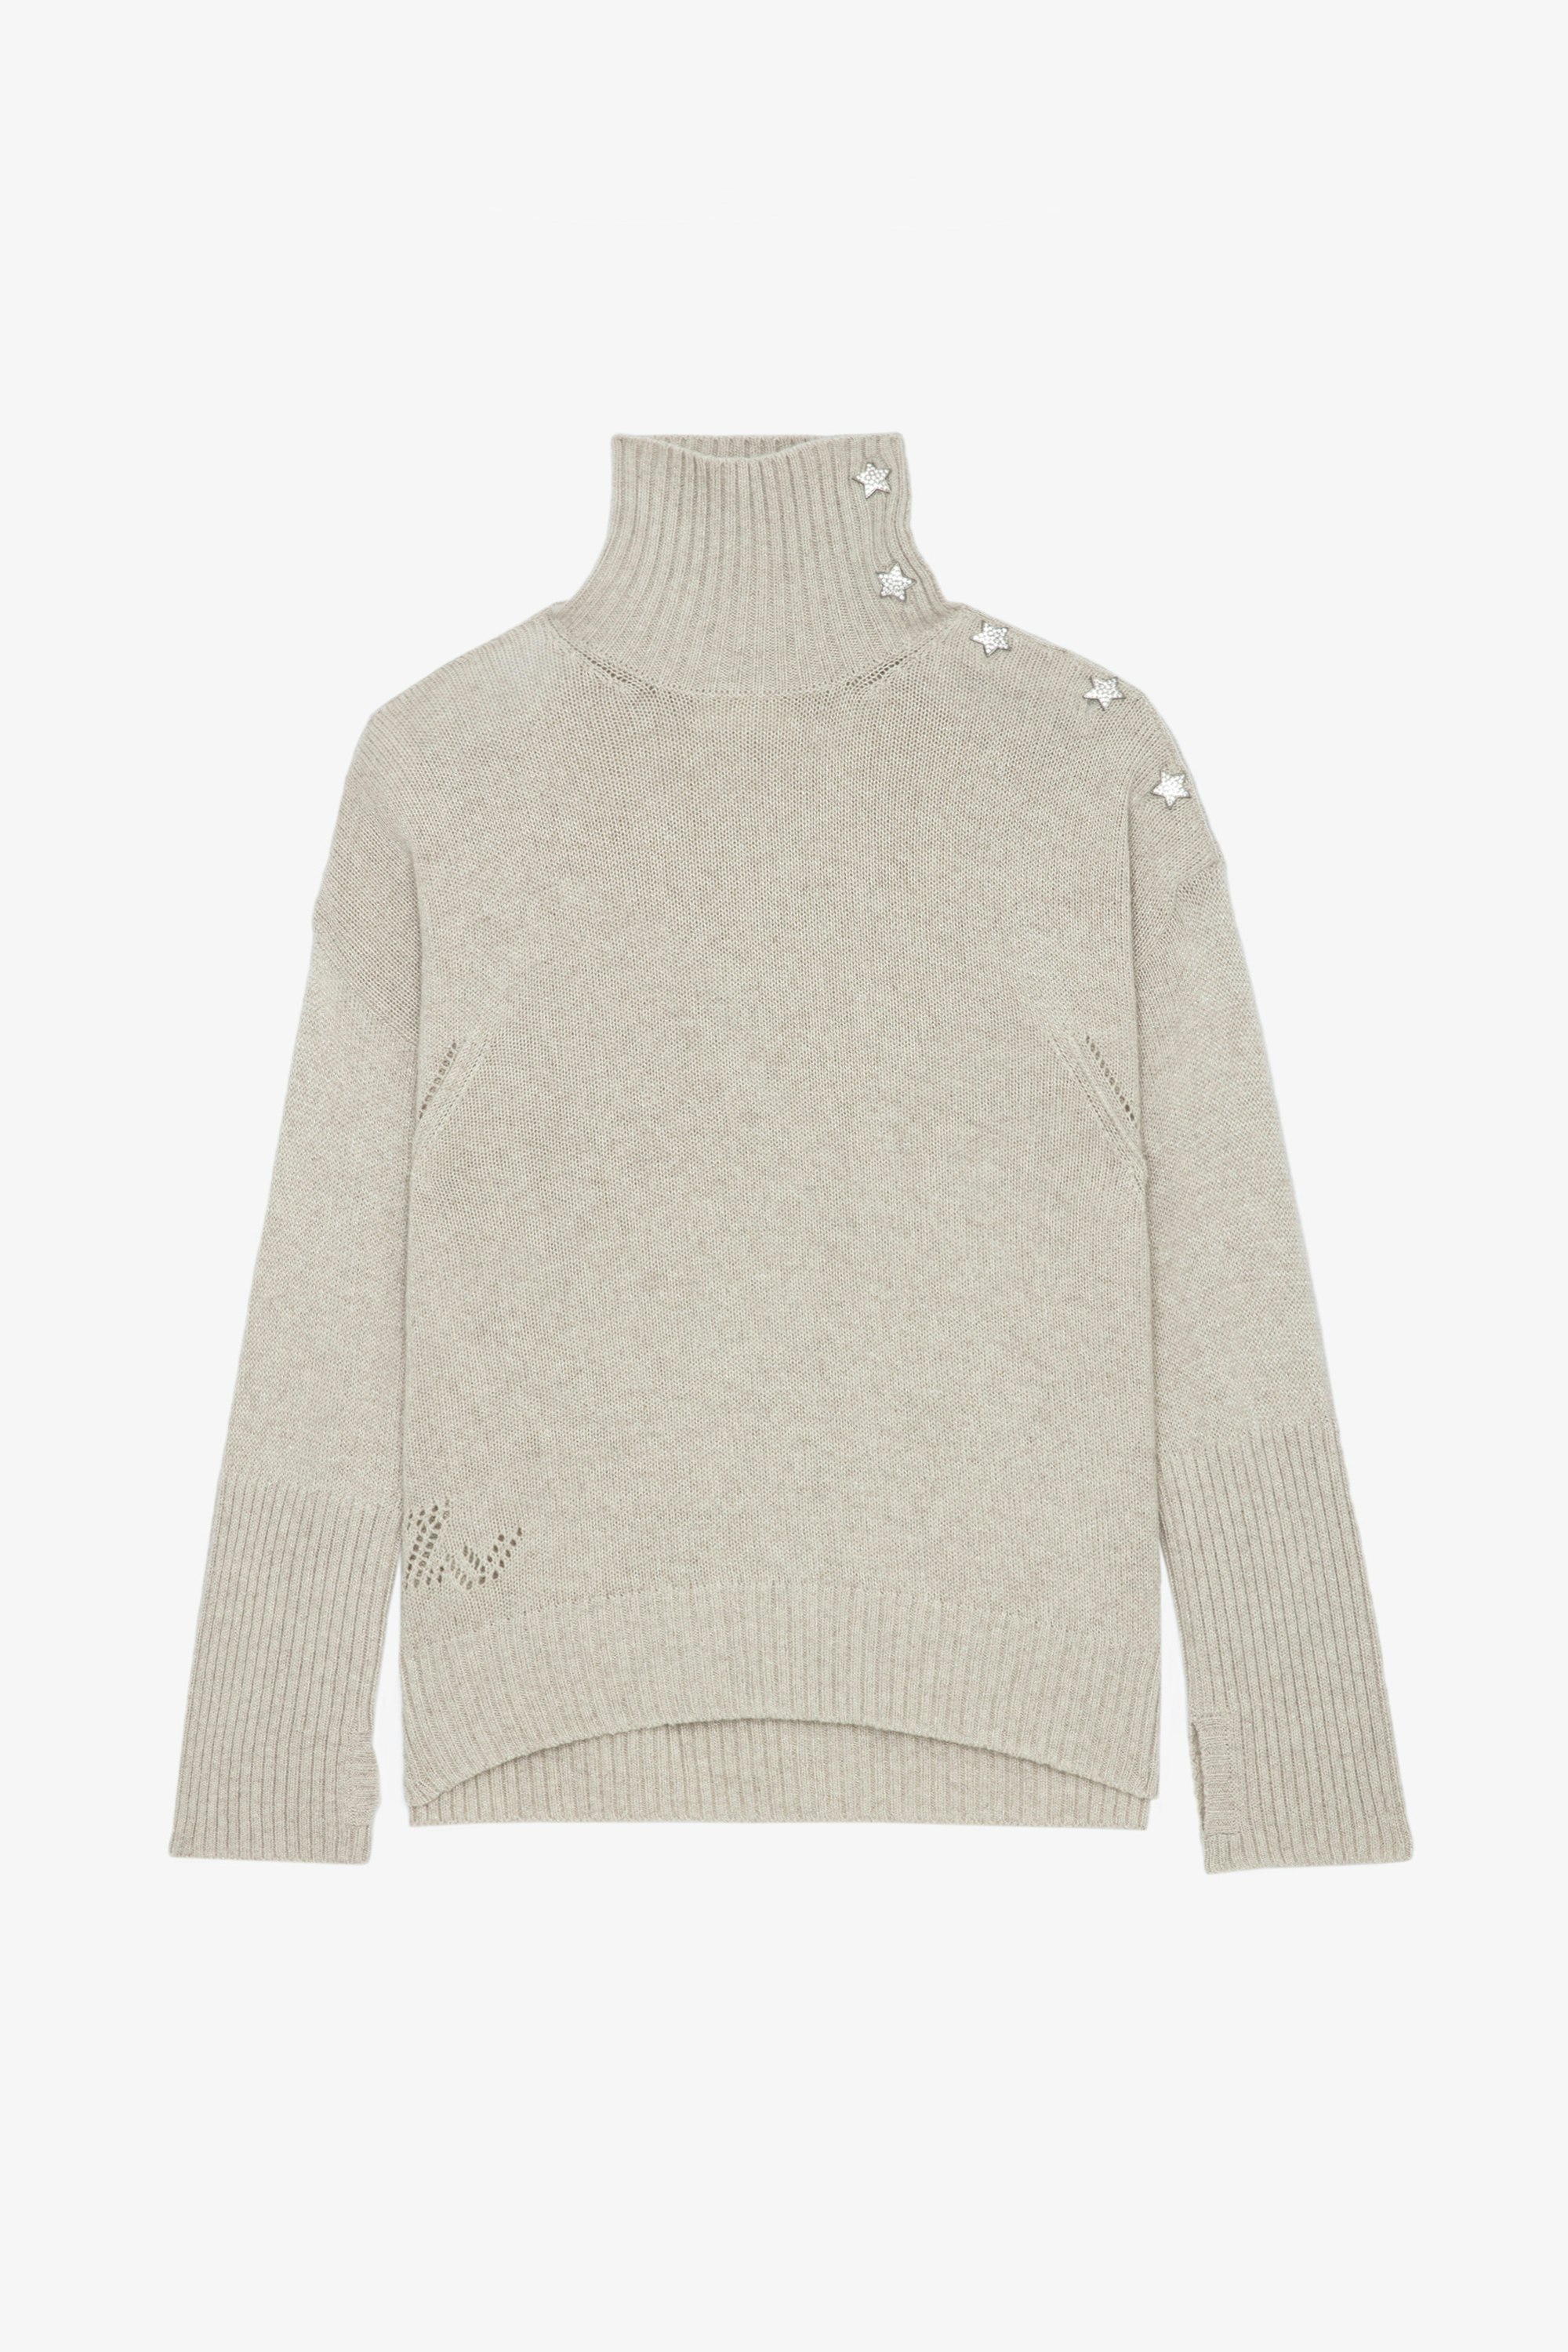 Alma Jewelled Jumper - Women’s cashmere jumper with high collar and jewelled buttons.